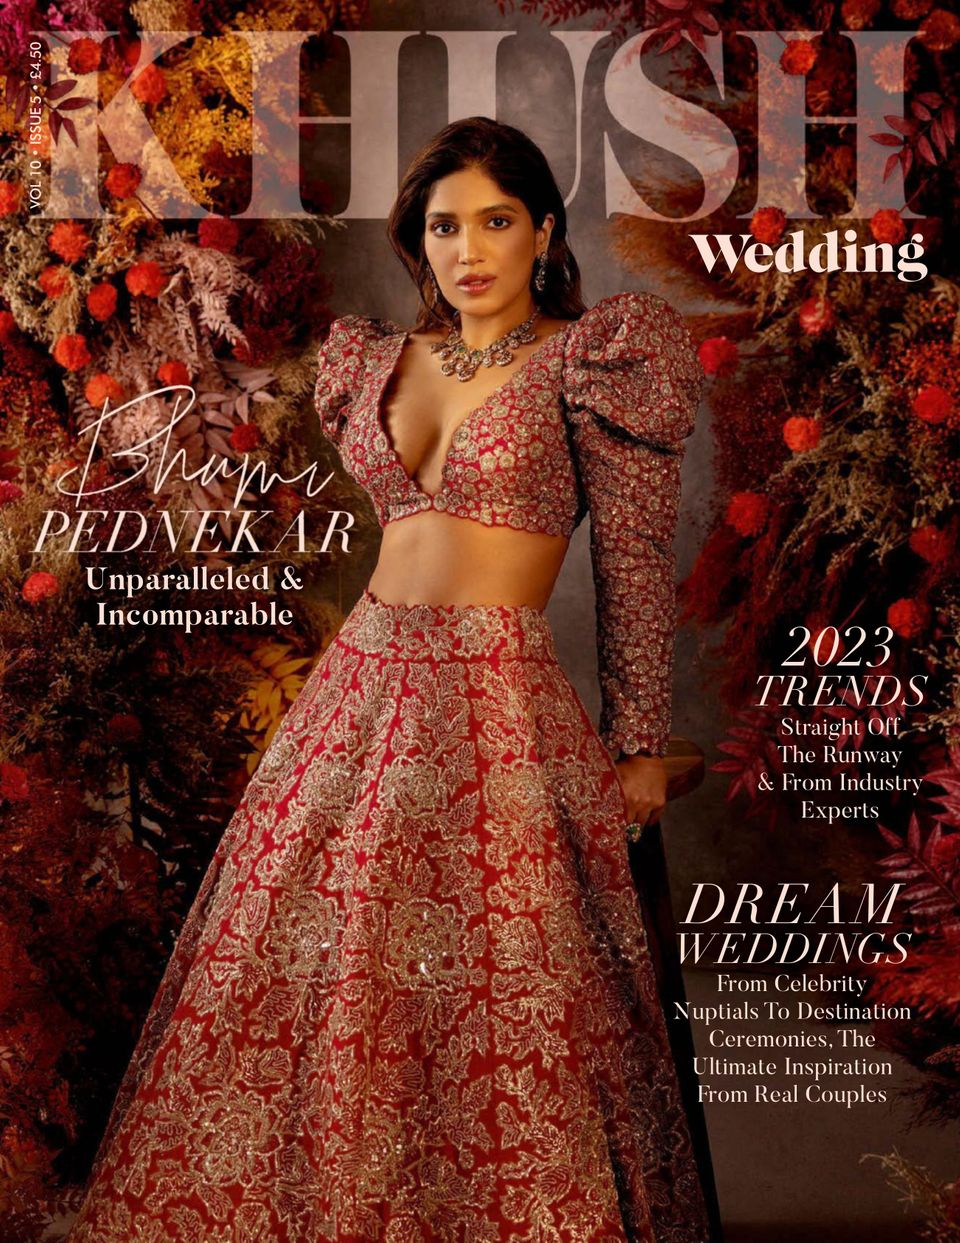 The Top Indian Wedding Trends For 2019 According To Celebrity Wedding  Experts, VOGUE India